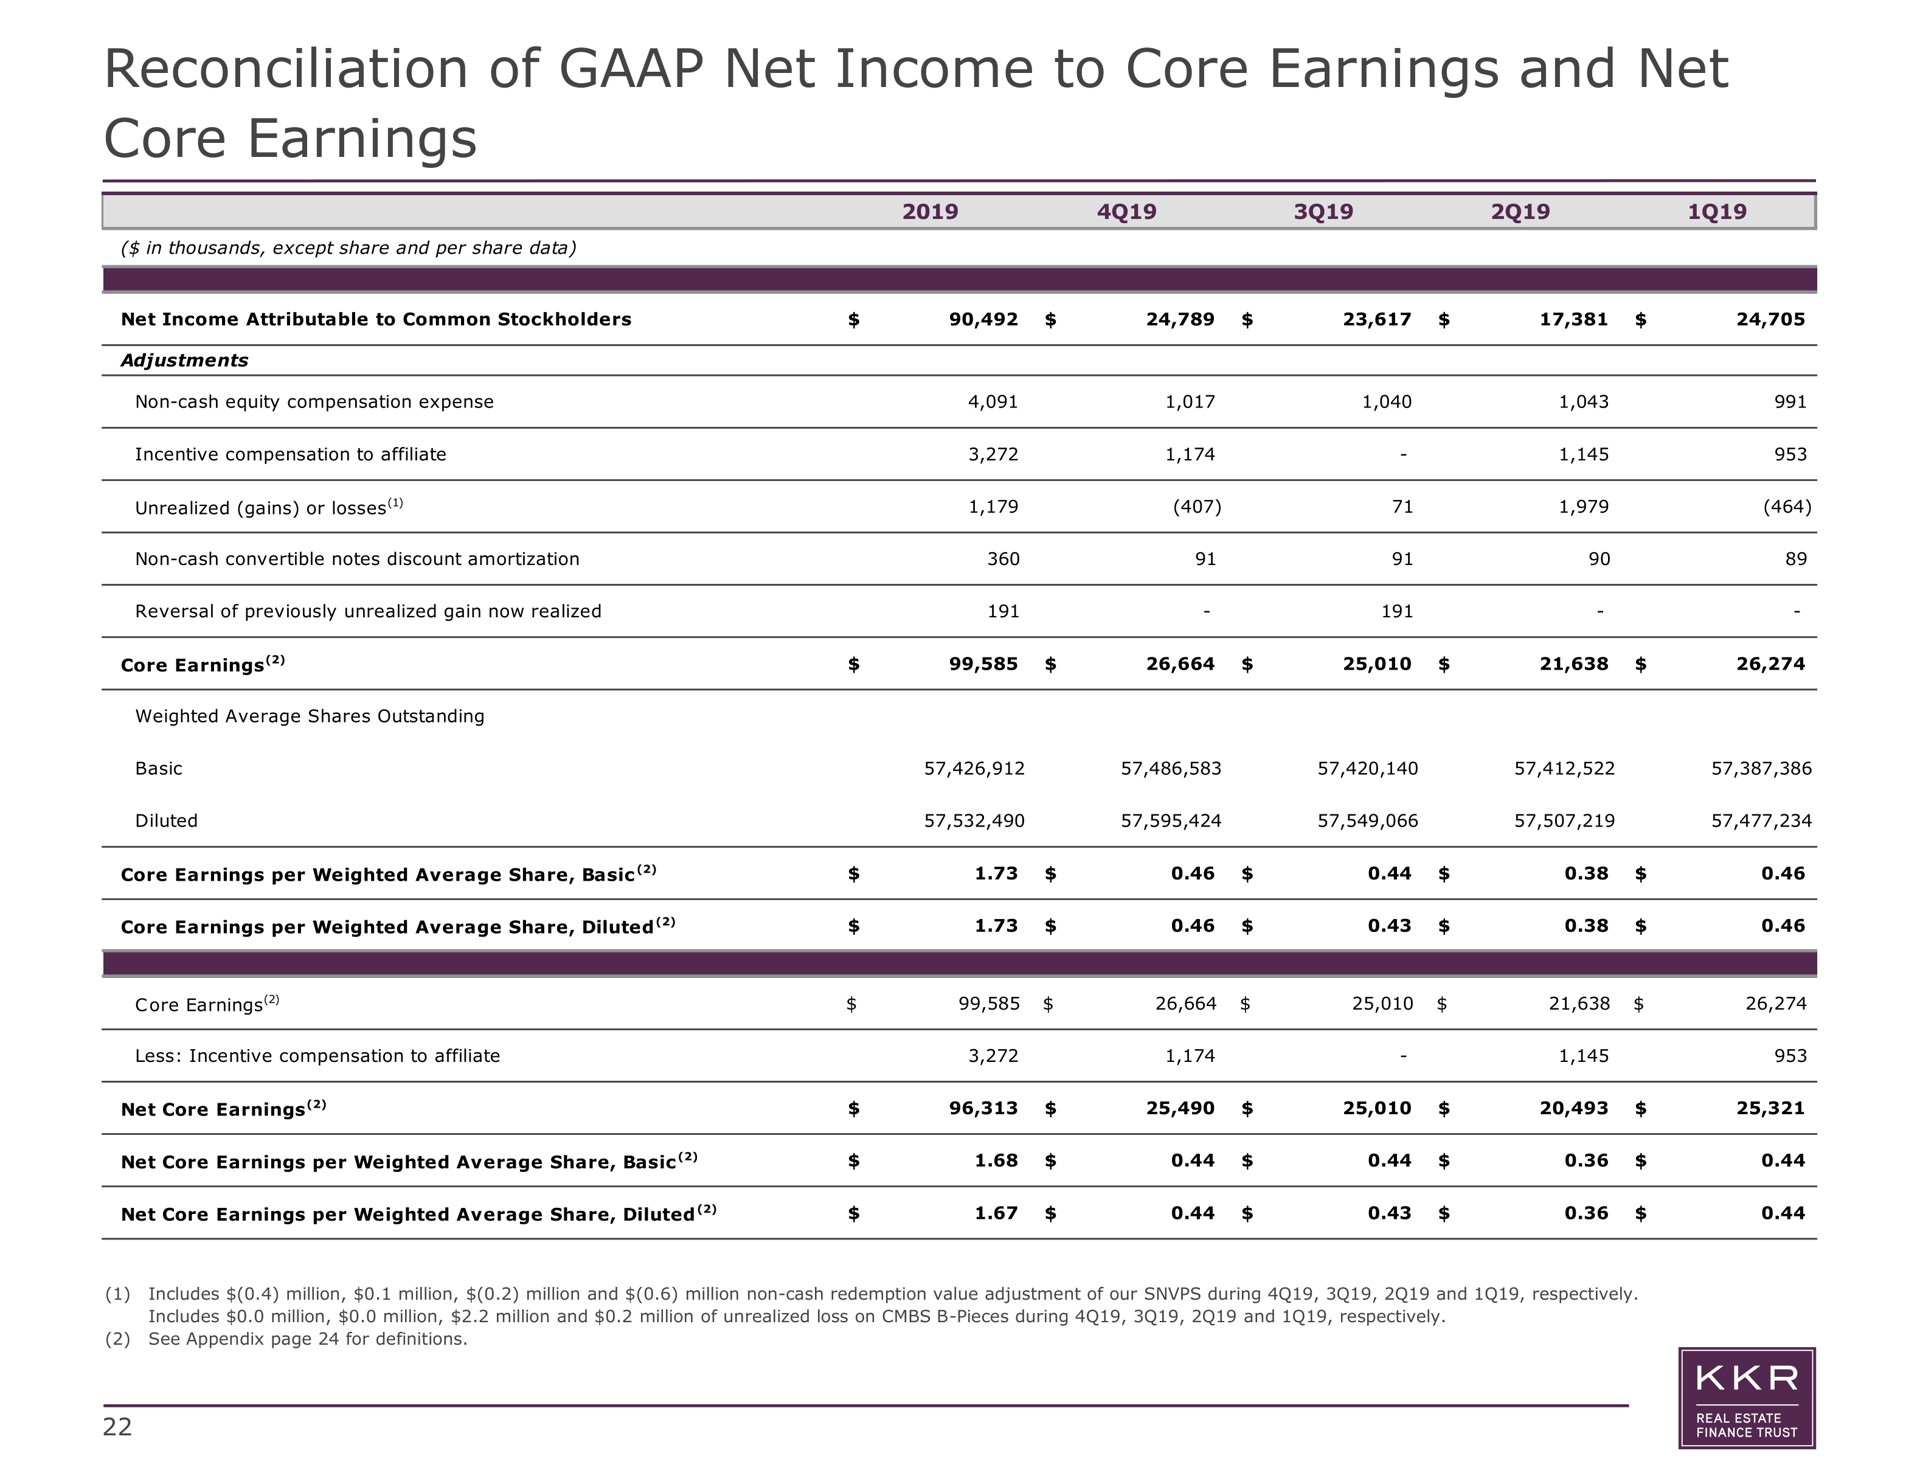 reconciliation of net income to core earnings and net core earnings | KKR Real Estate Finance Trust